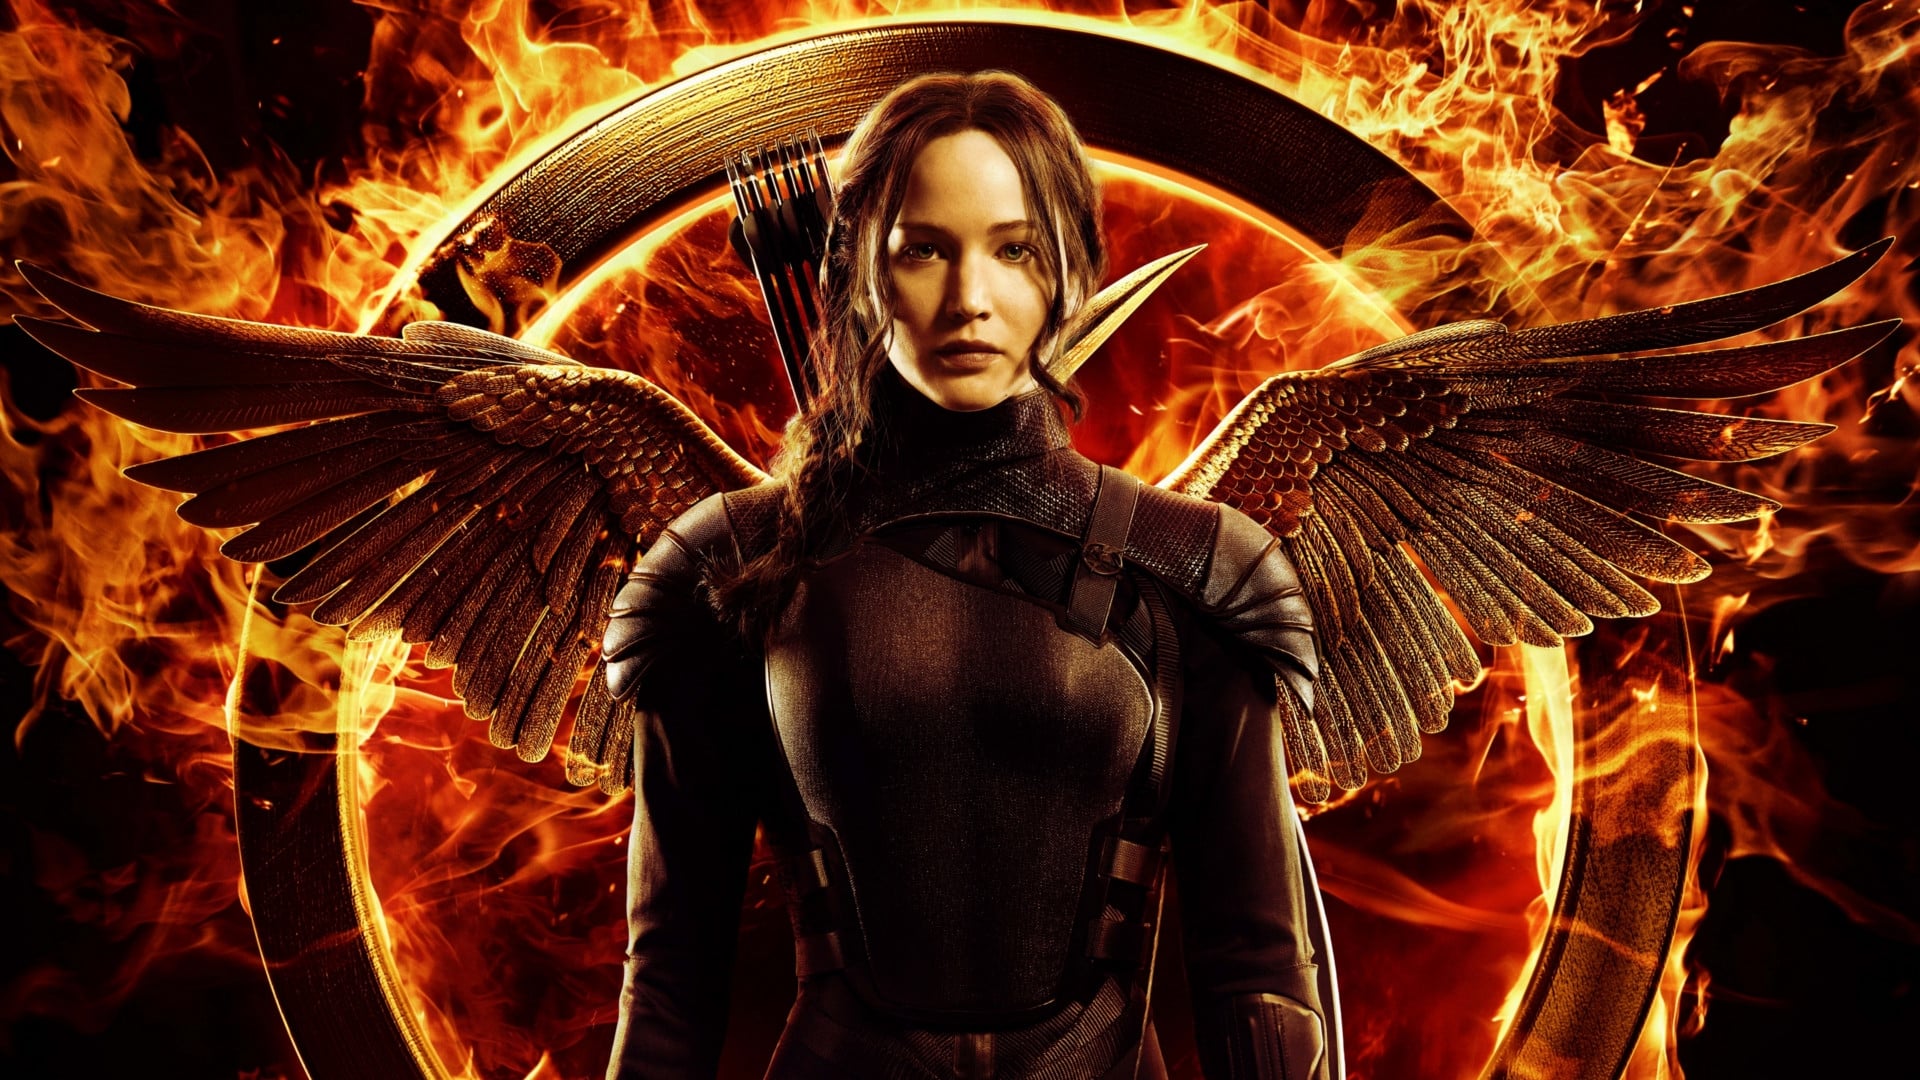 The Hunger Games: Mockingjay Part 1 Show off its first poster